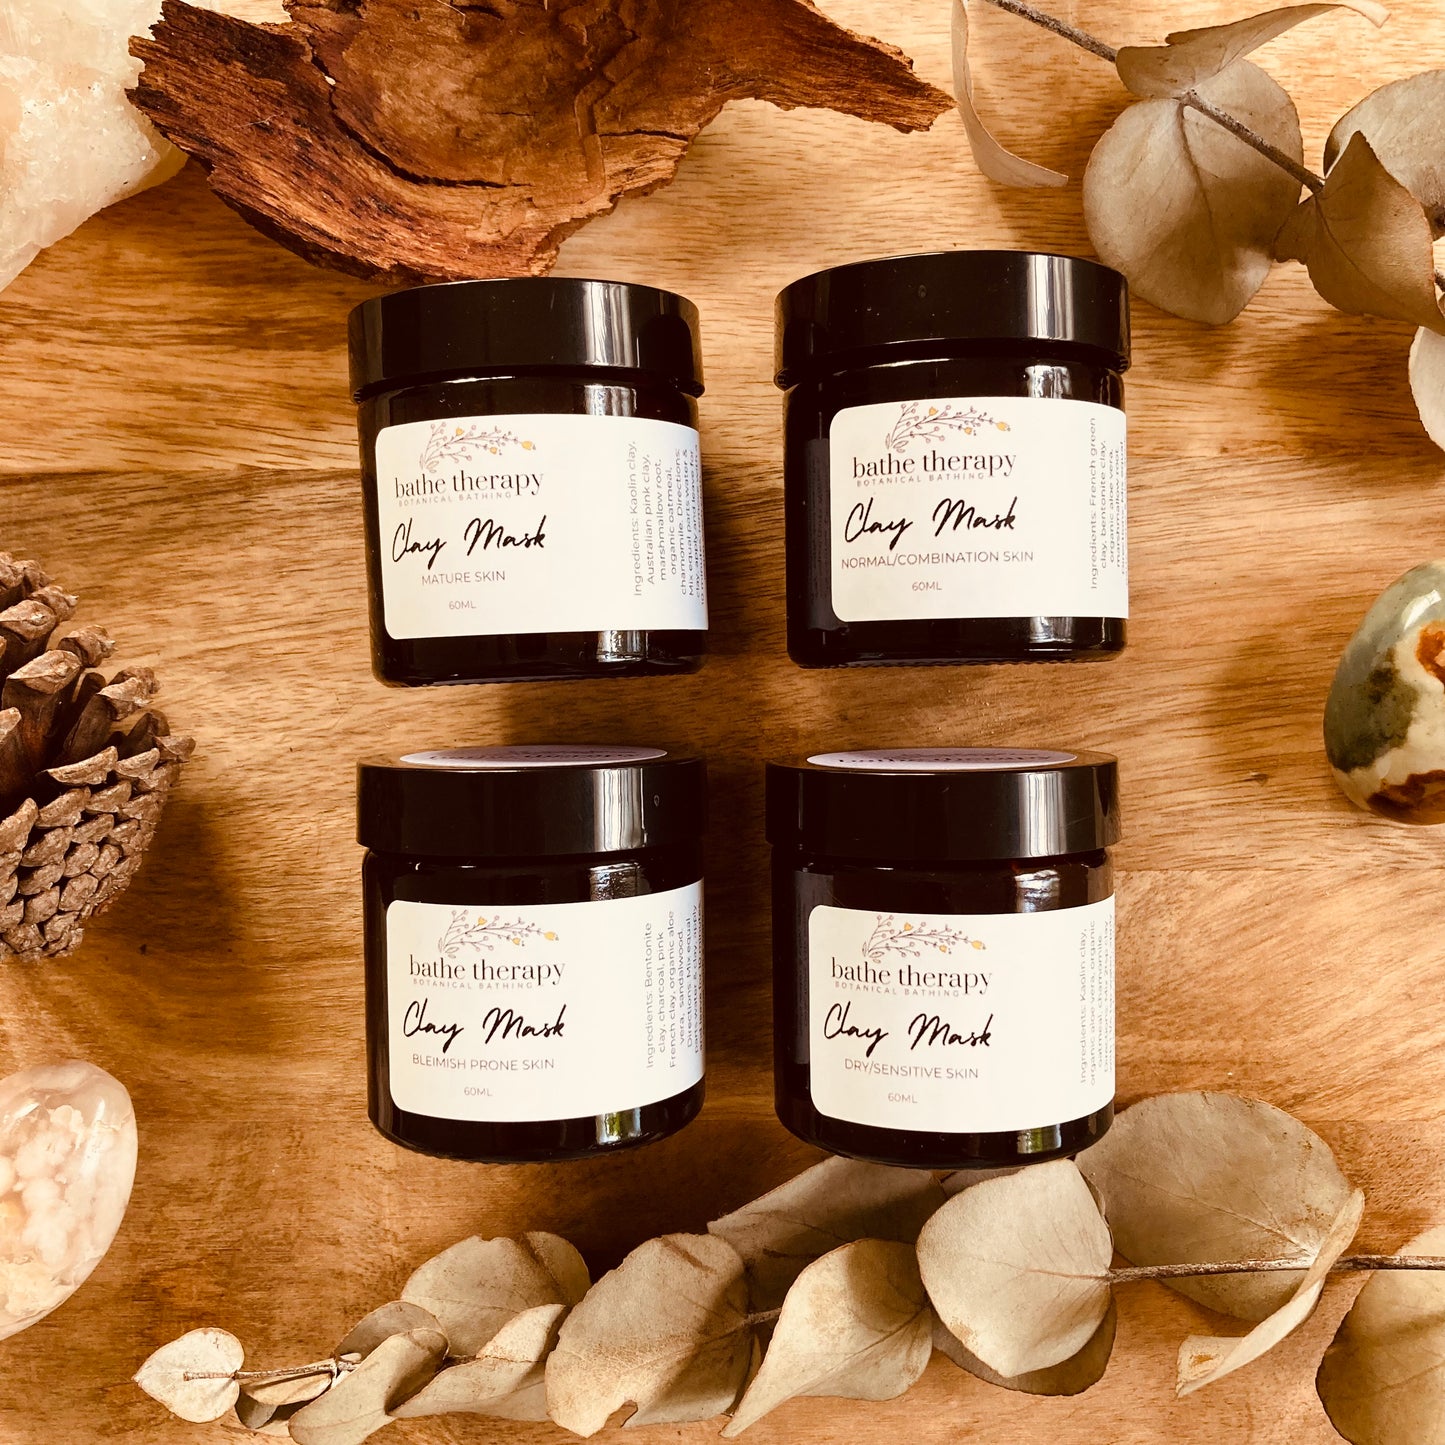 Organic clay mask and botanical face steam gift box set